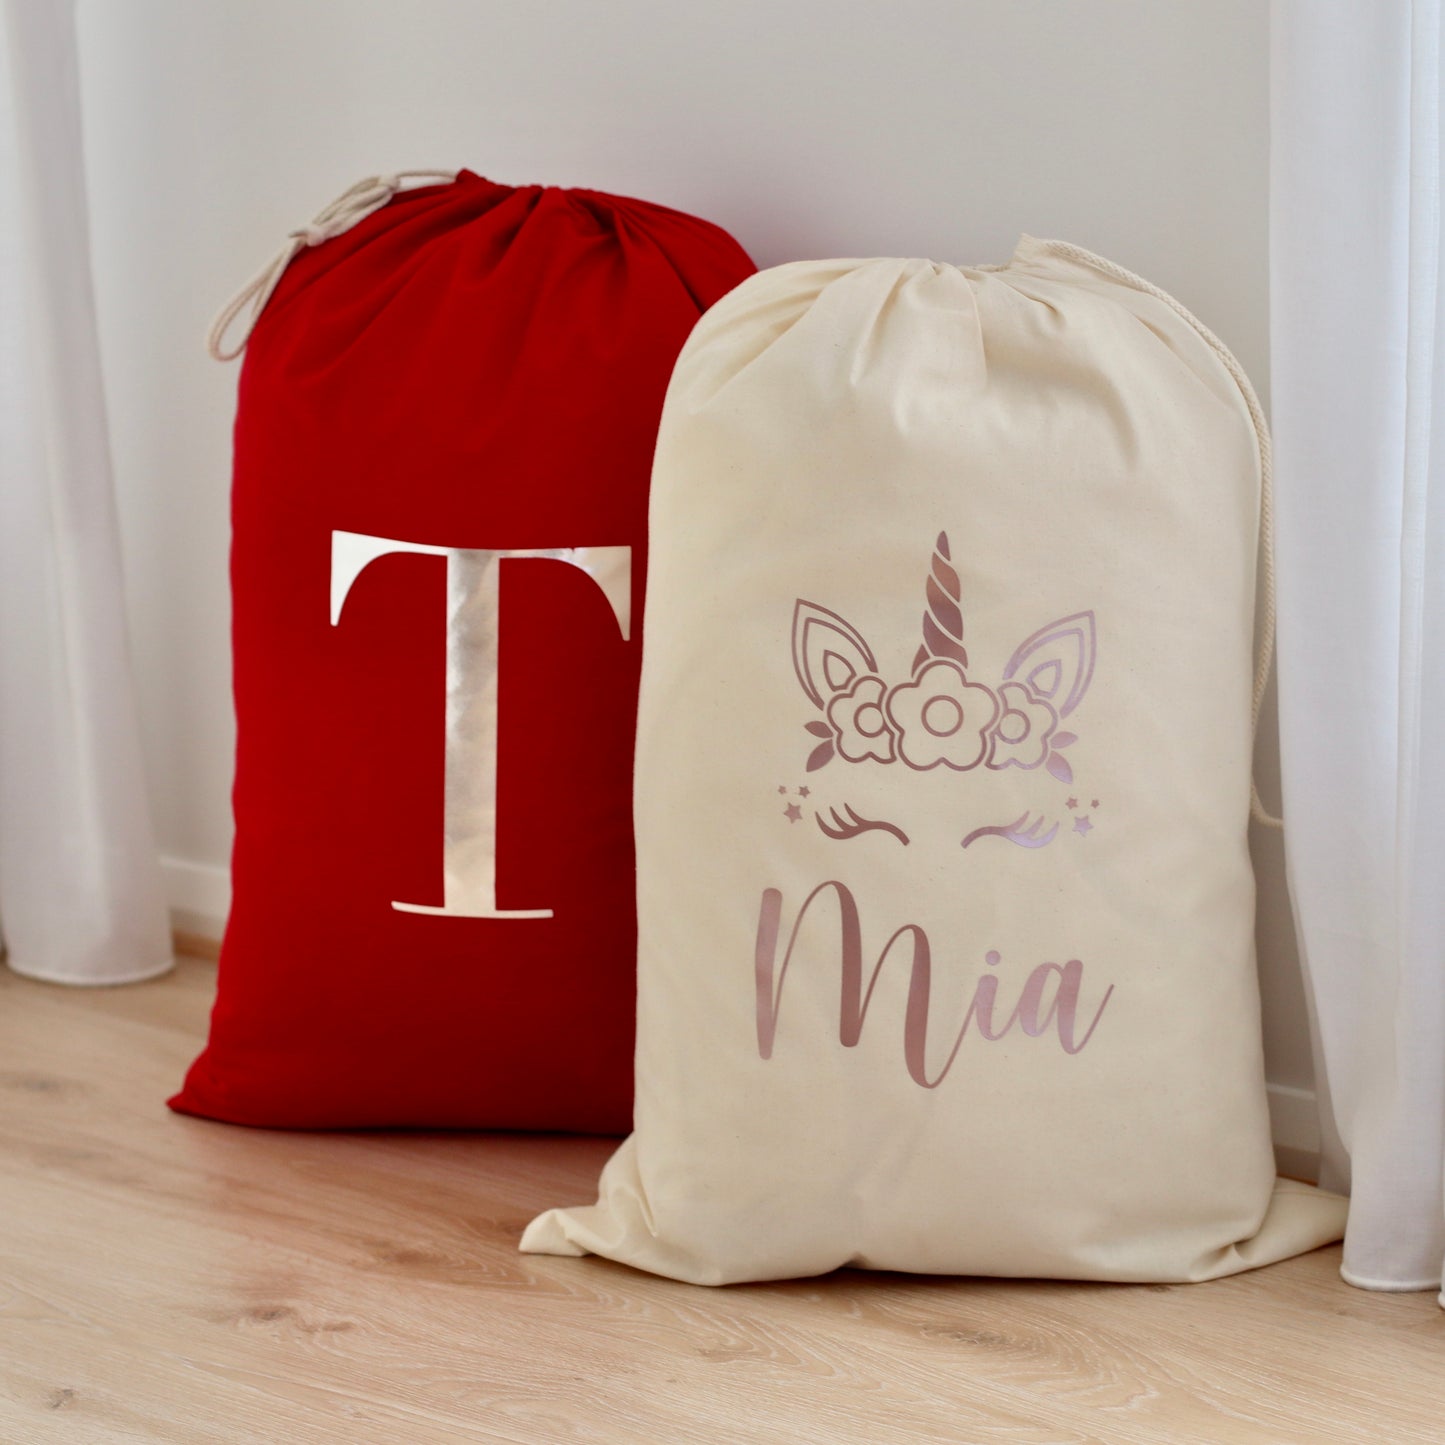 These personalised Santa sacks are perfect as a keepsake for your own children for Santa to deliver their gifts in, as well as gifting to the special little ones in your life.